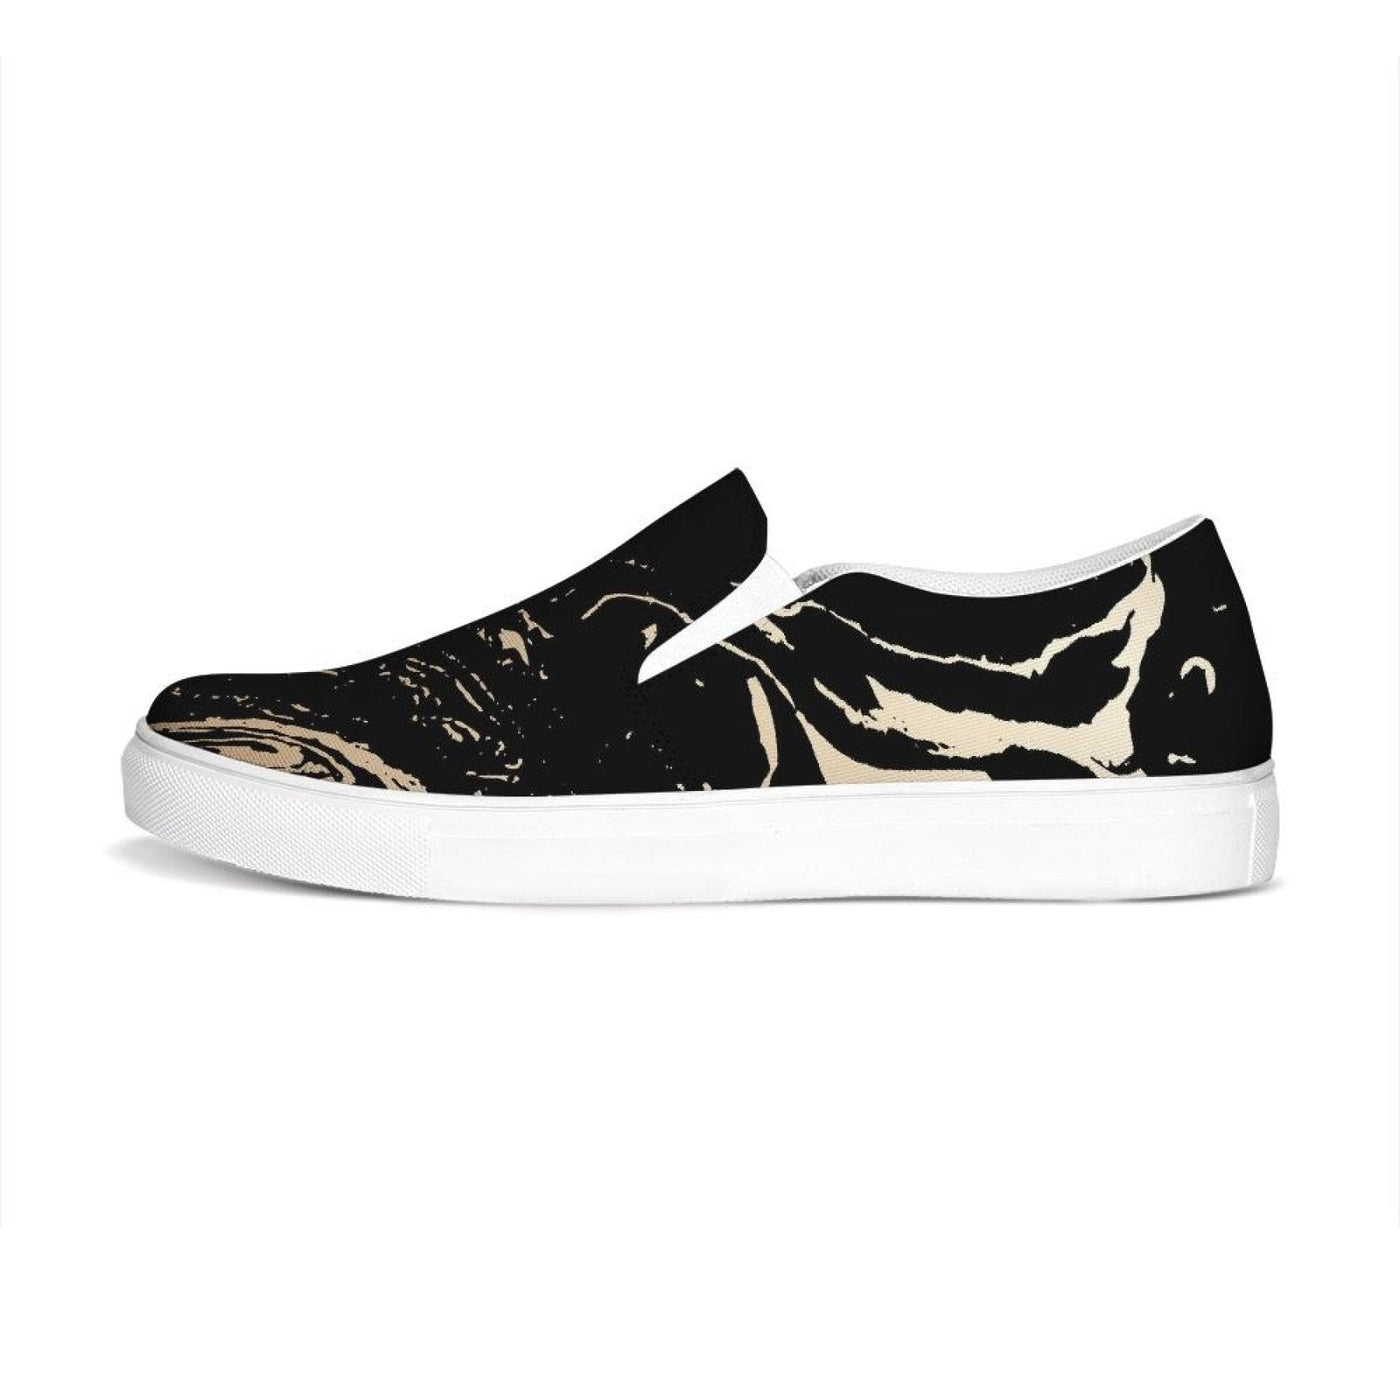 Uniquely You Womens Sneakers - Black & Beige Swirl Style Low Top Slip-On Canvas 